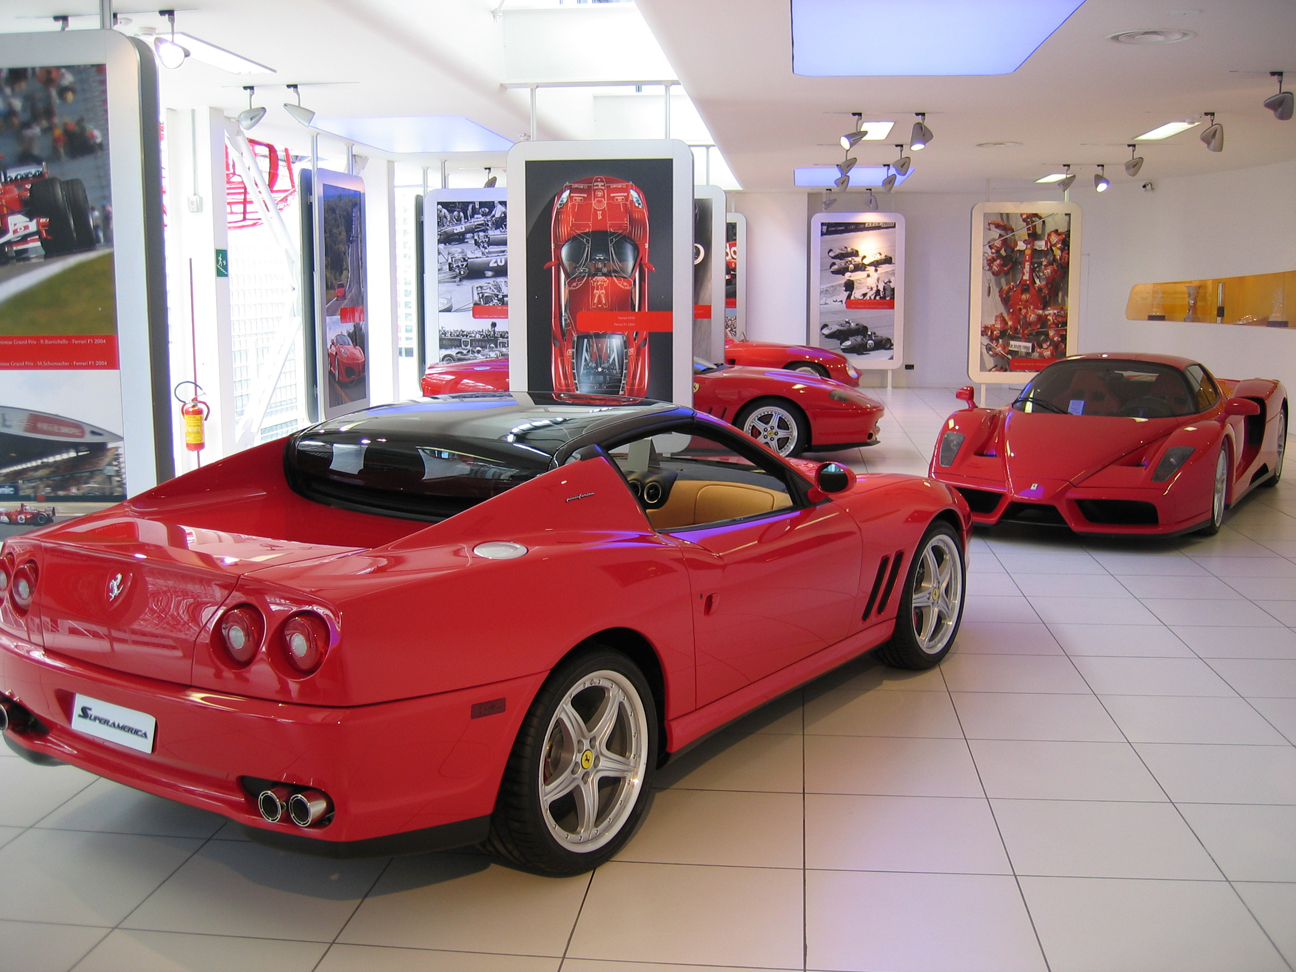 3 Things You Should Know about Emilia Romagna by Italy Perfect Ferrari Museum